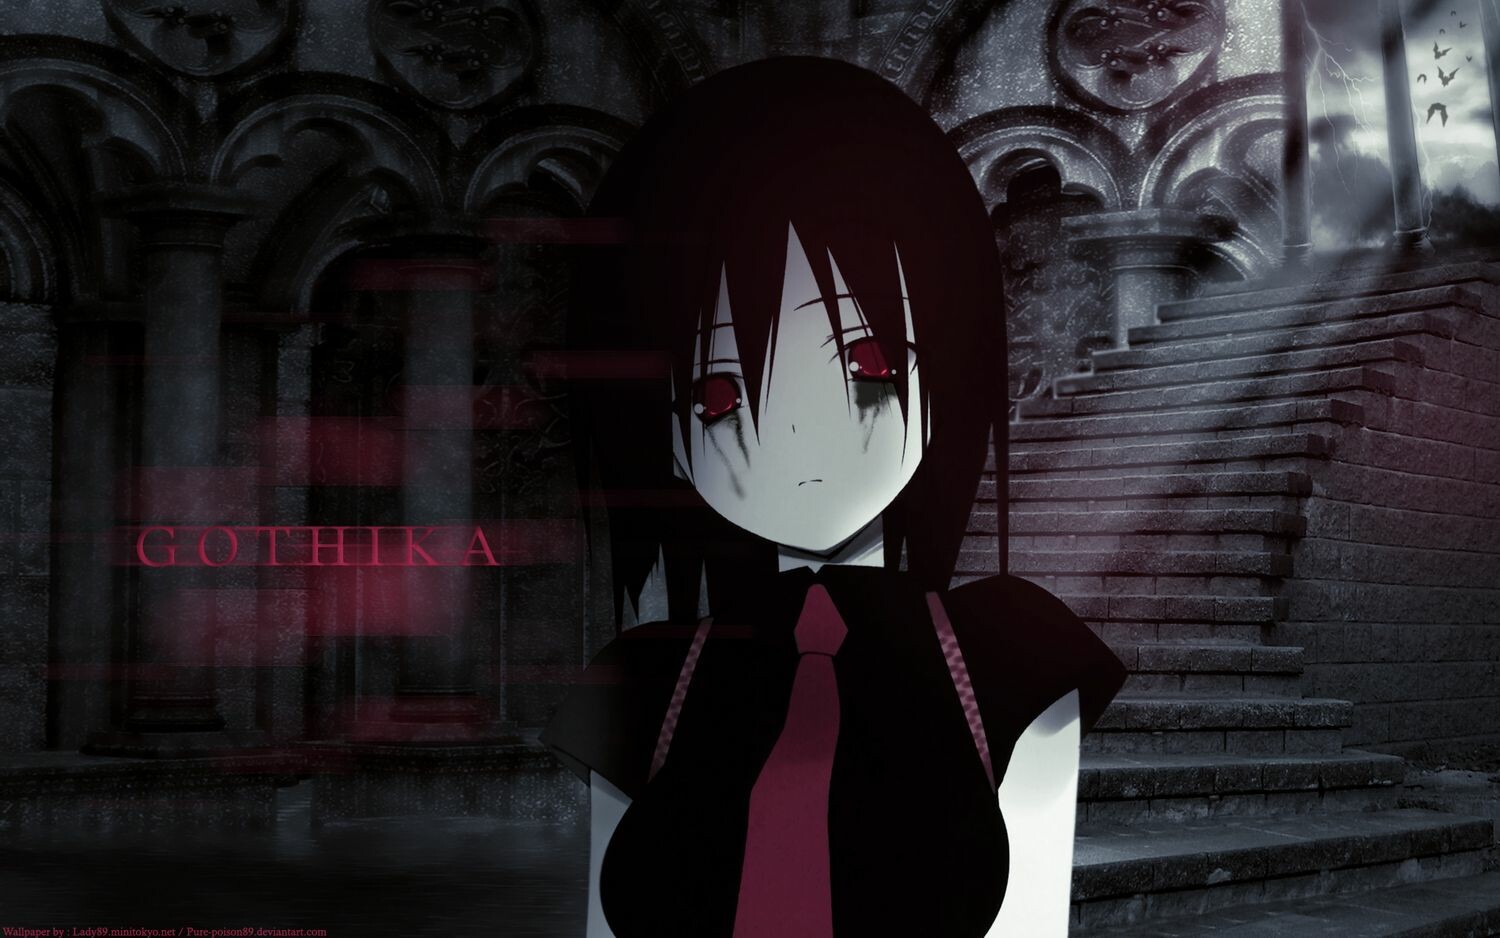 Gothic Anime Wallpaper: HD, 4K, 5K for PC and Mobile. Download free image for iPhone, Android